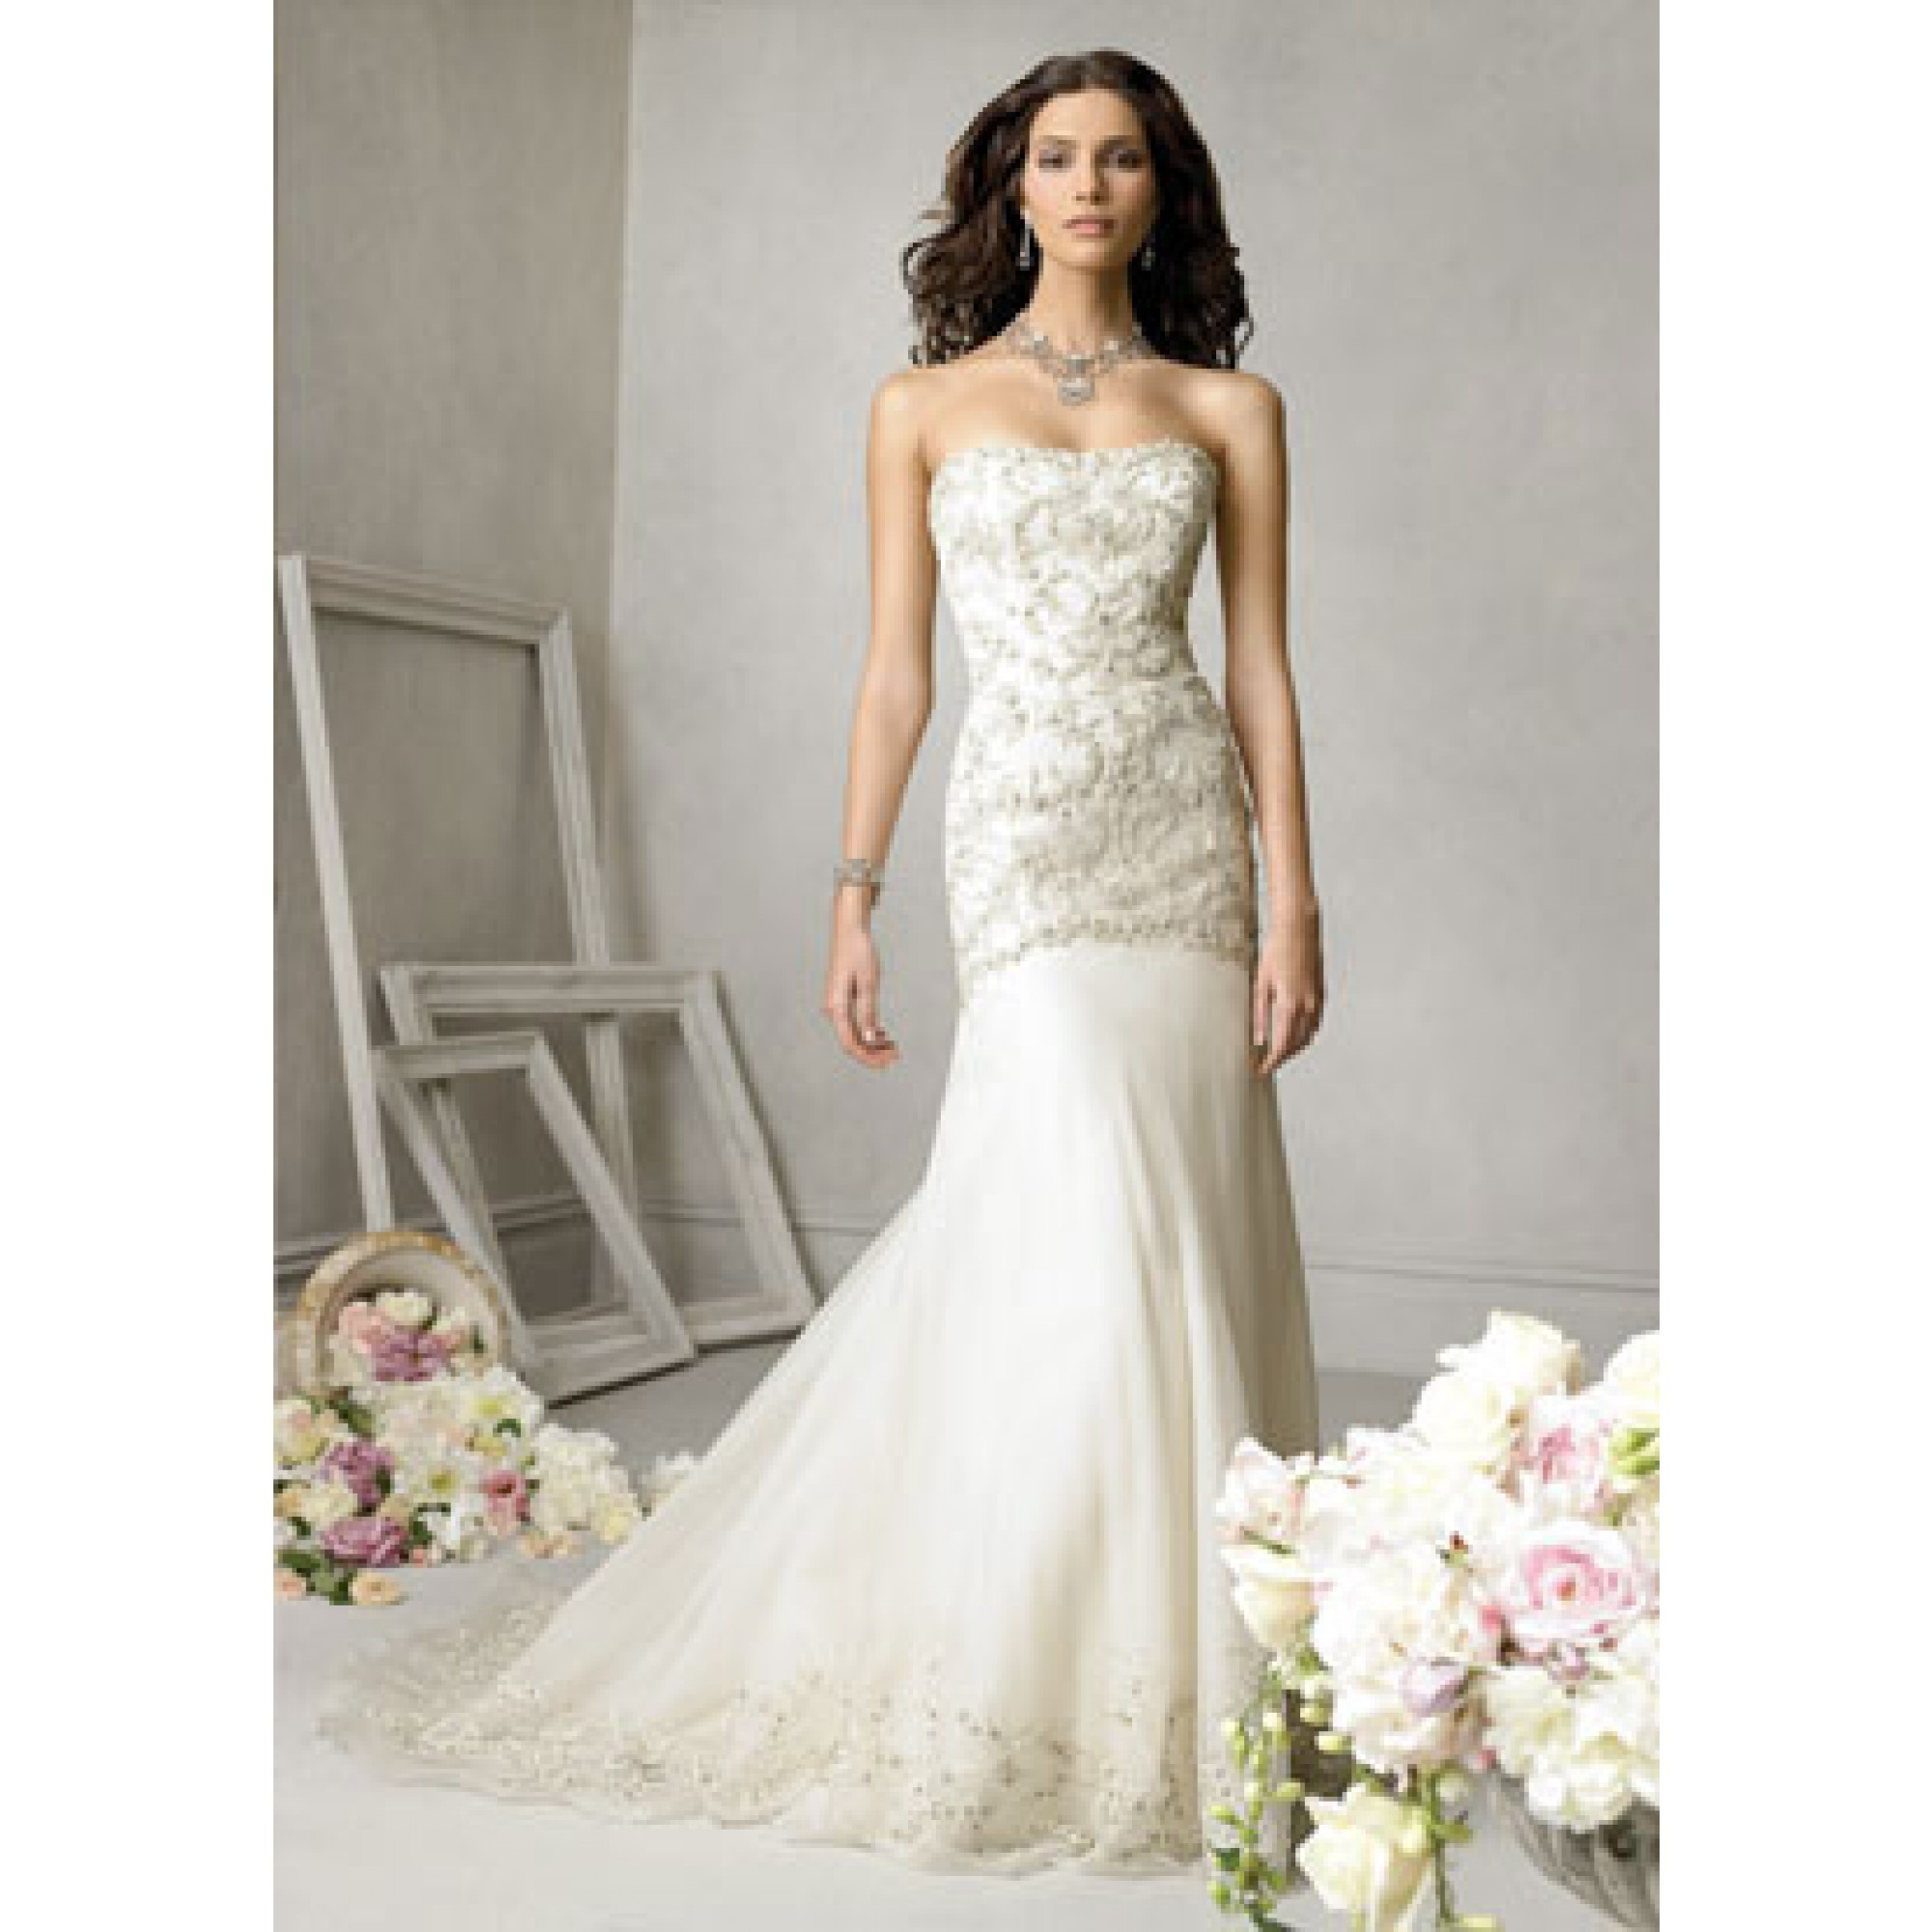 Wedding Gowns Tampa
 Tampa wedding dresses